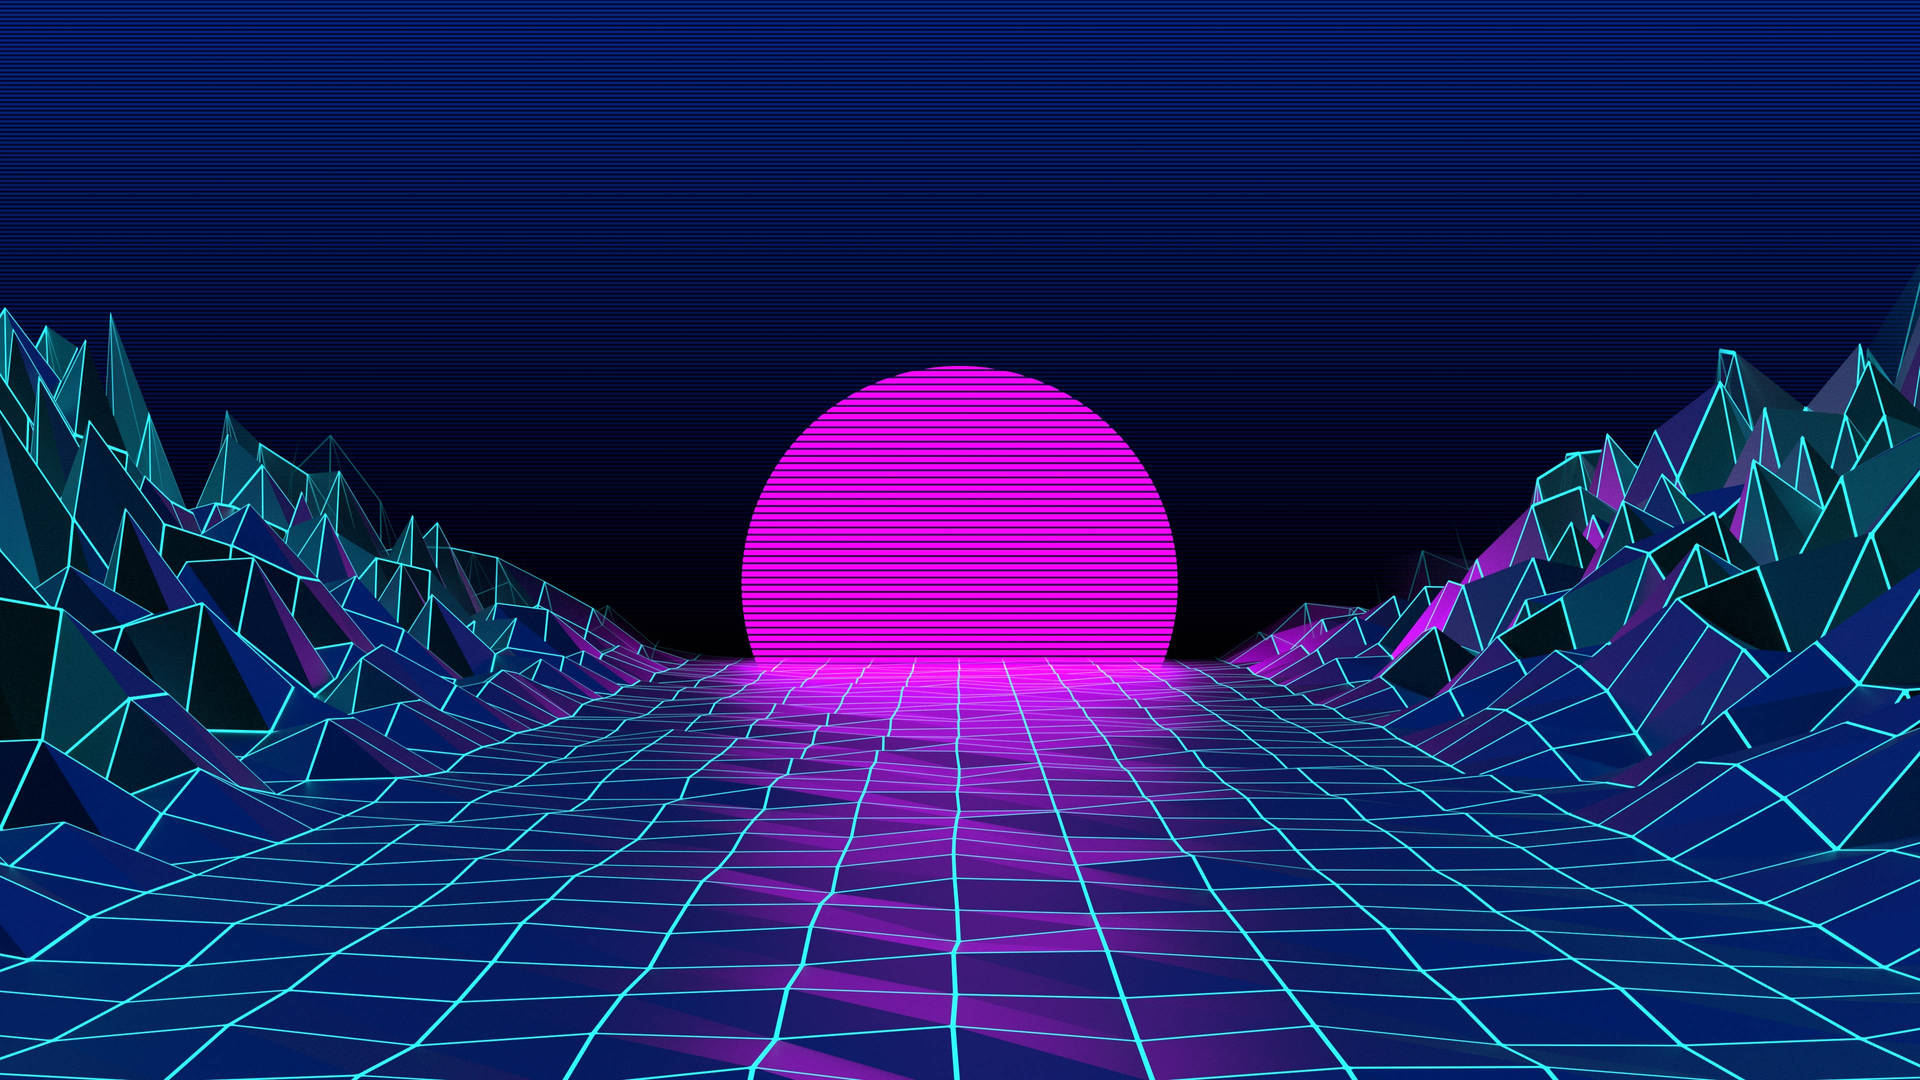 80S 3840X2160 Wallpaper and Background Image